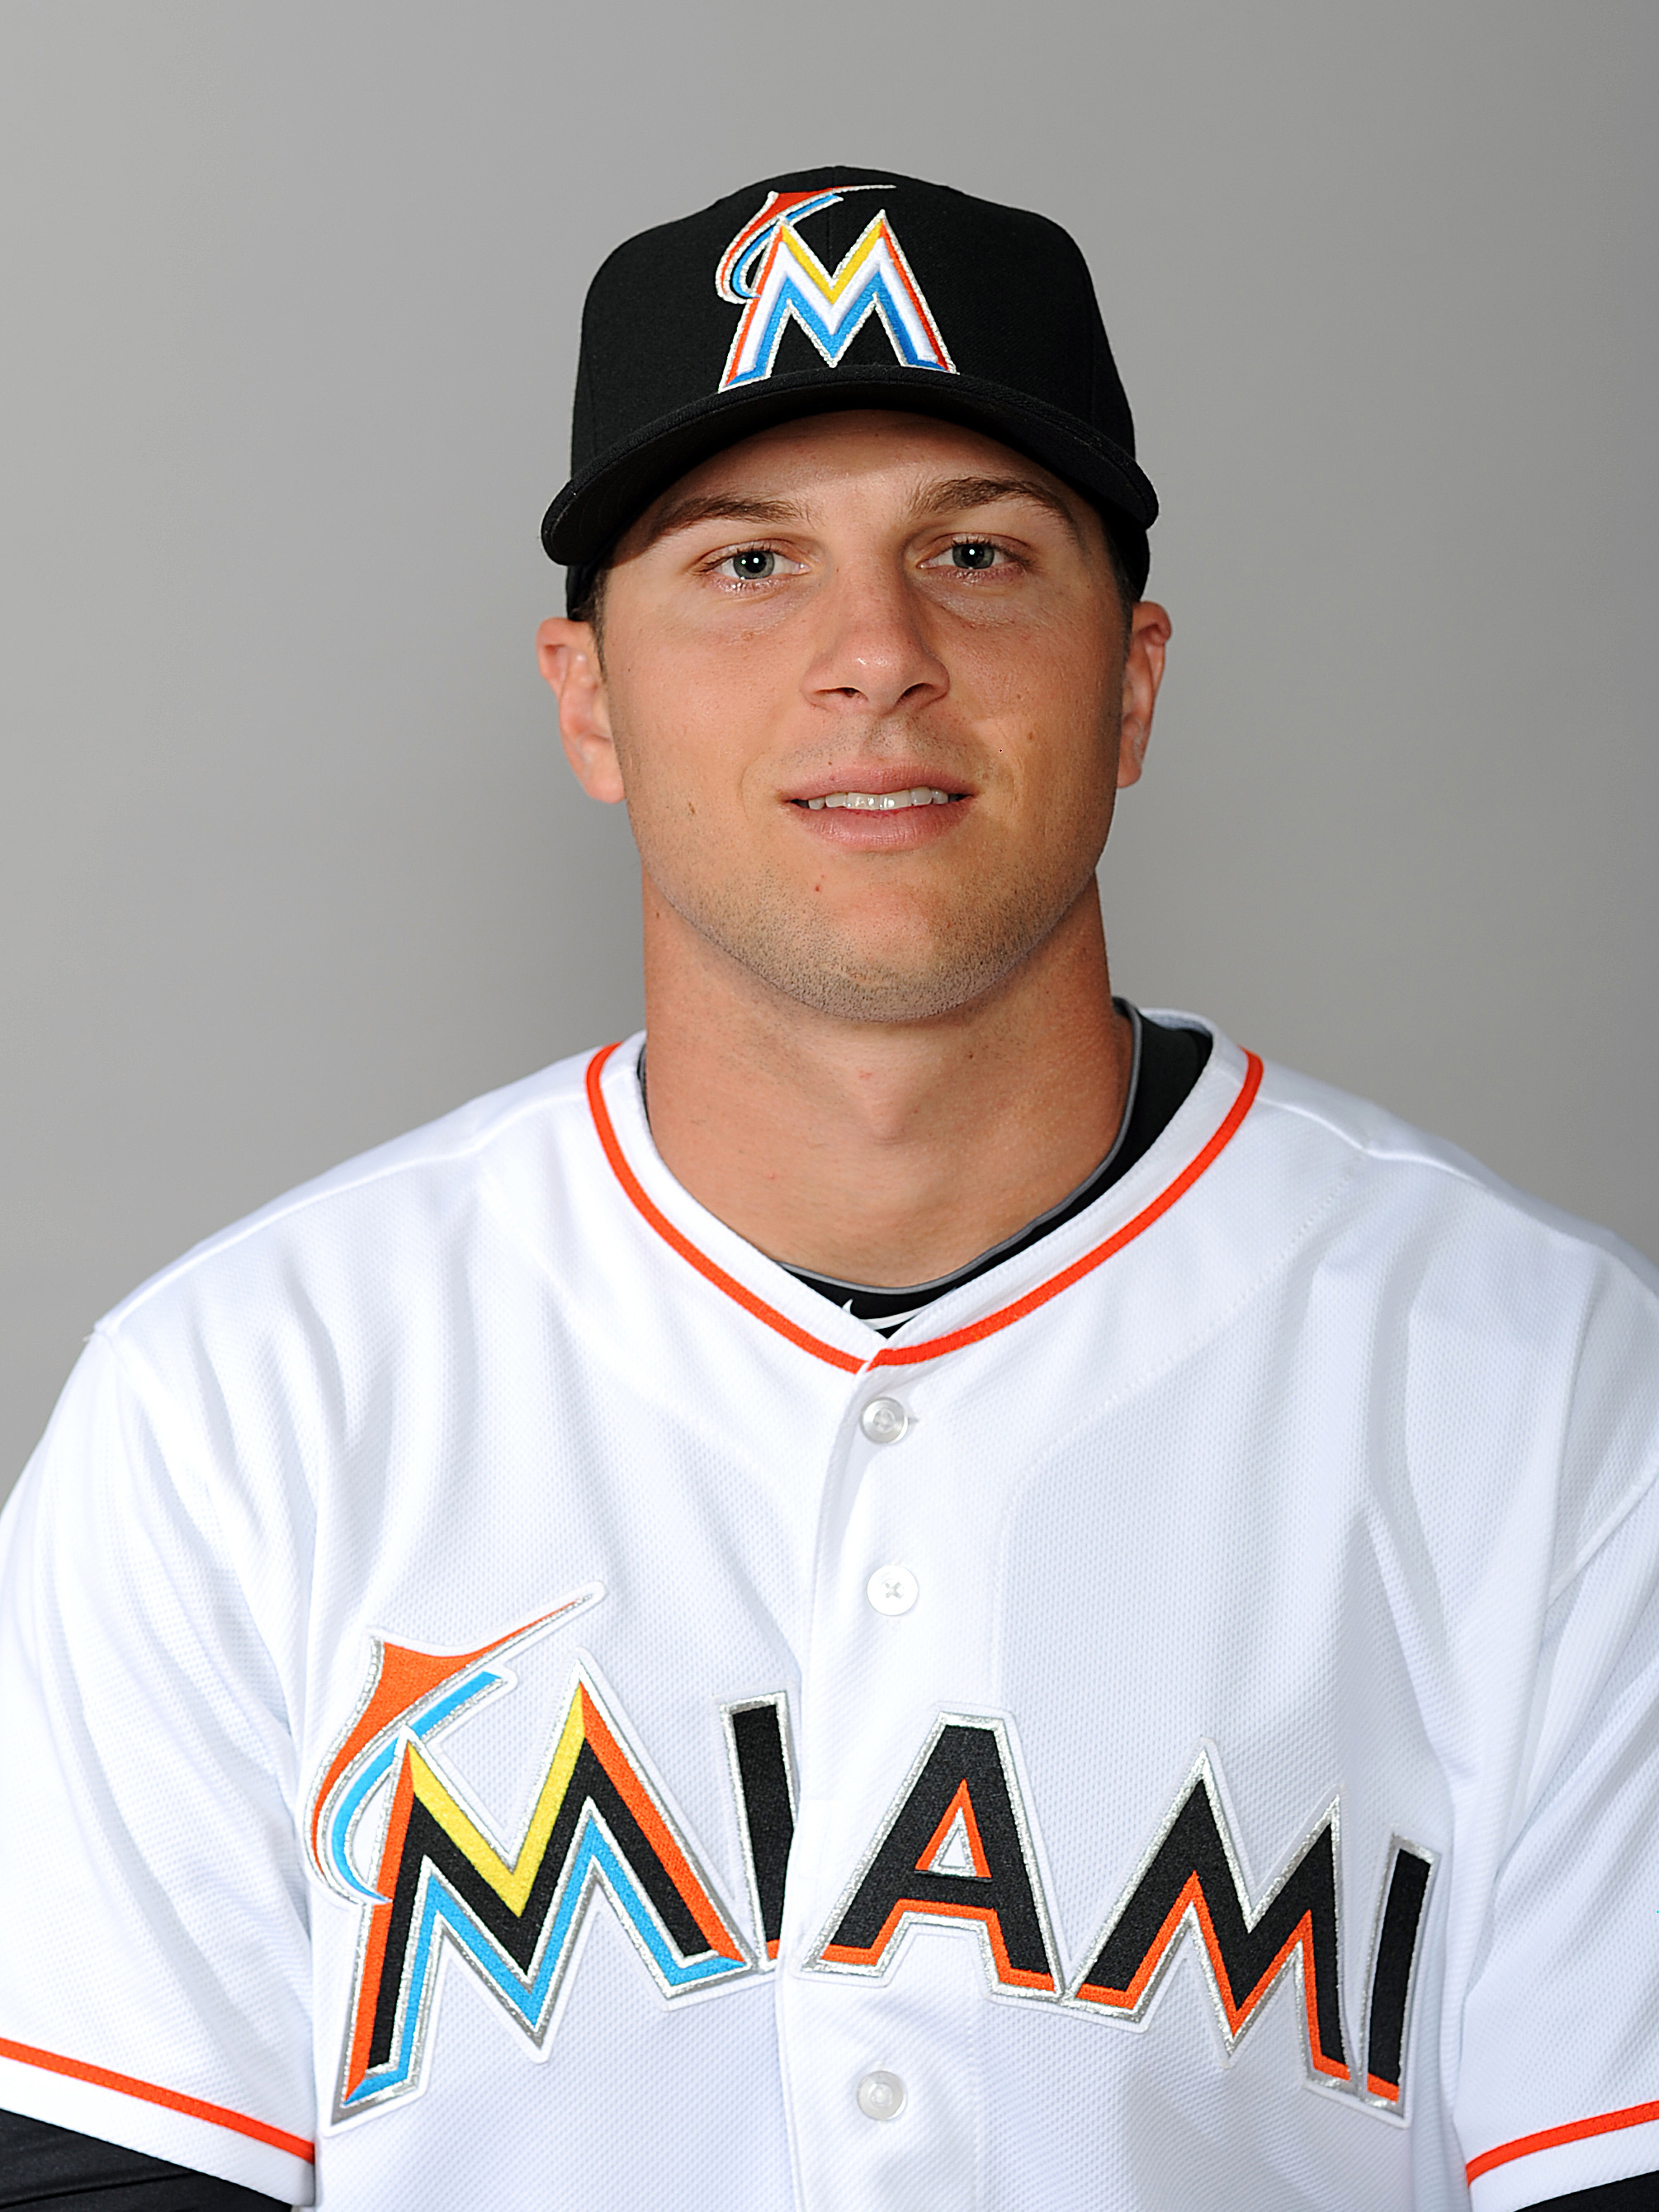 Derek Dietrich has been on fire in June for the Miami Marlins